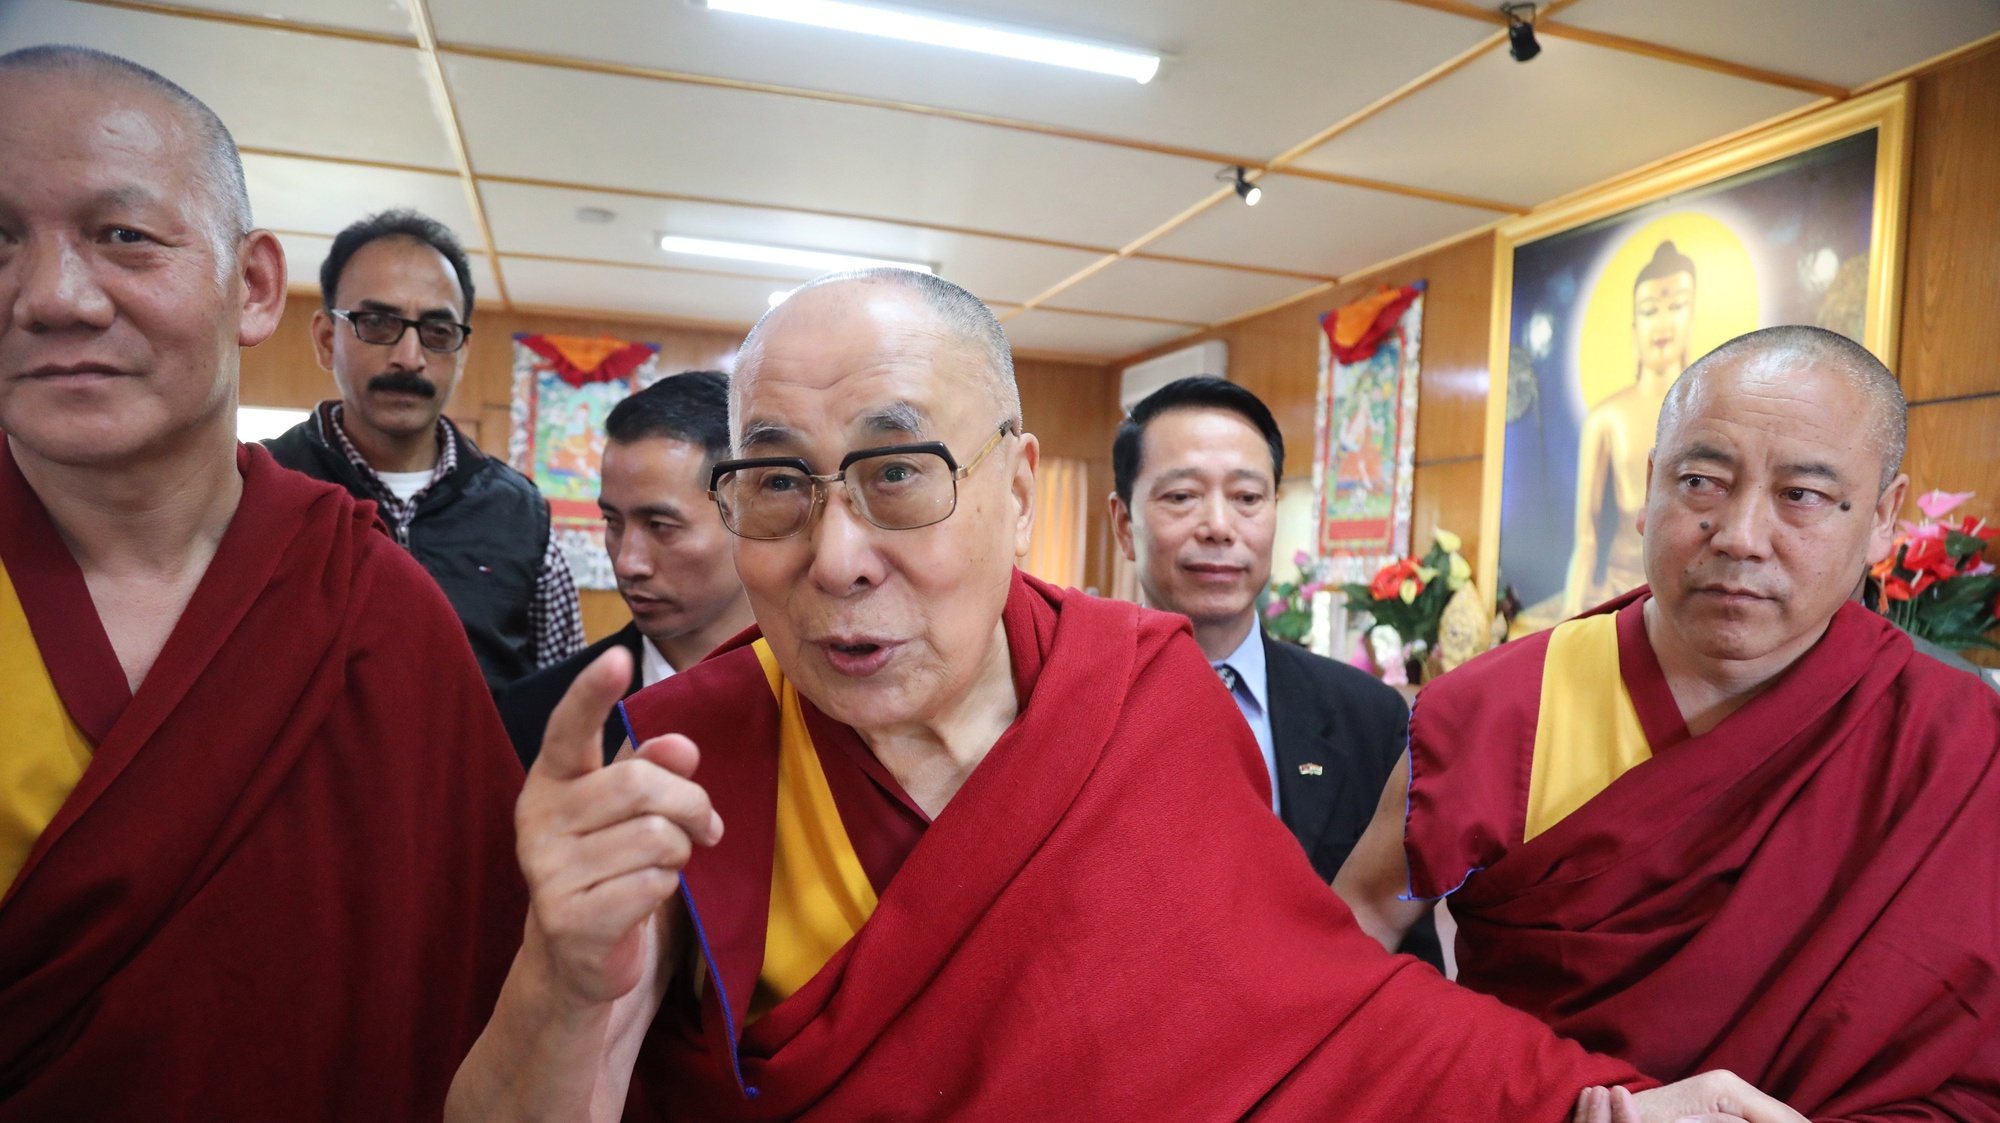 epa07948873 Tibetan spiritual leader the Dalai Lama (C), during an event to meet students and faculty members of the educational course on Ancient Indian Wisdom at Dharamsala, India, 25 October 2019. The Government College Dharamsala has recently started a 6-month certificate course in Ancient Indian Wisdom which has been approved by the Himachal Pradesh government’s educational body.  EPA/SANJAY BAID